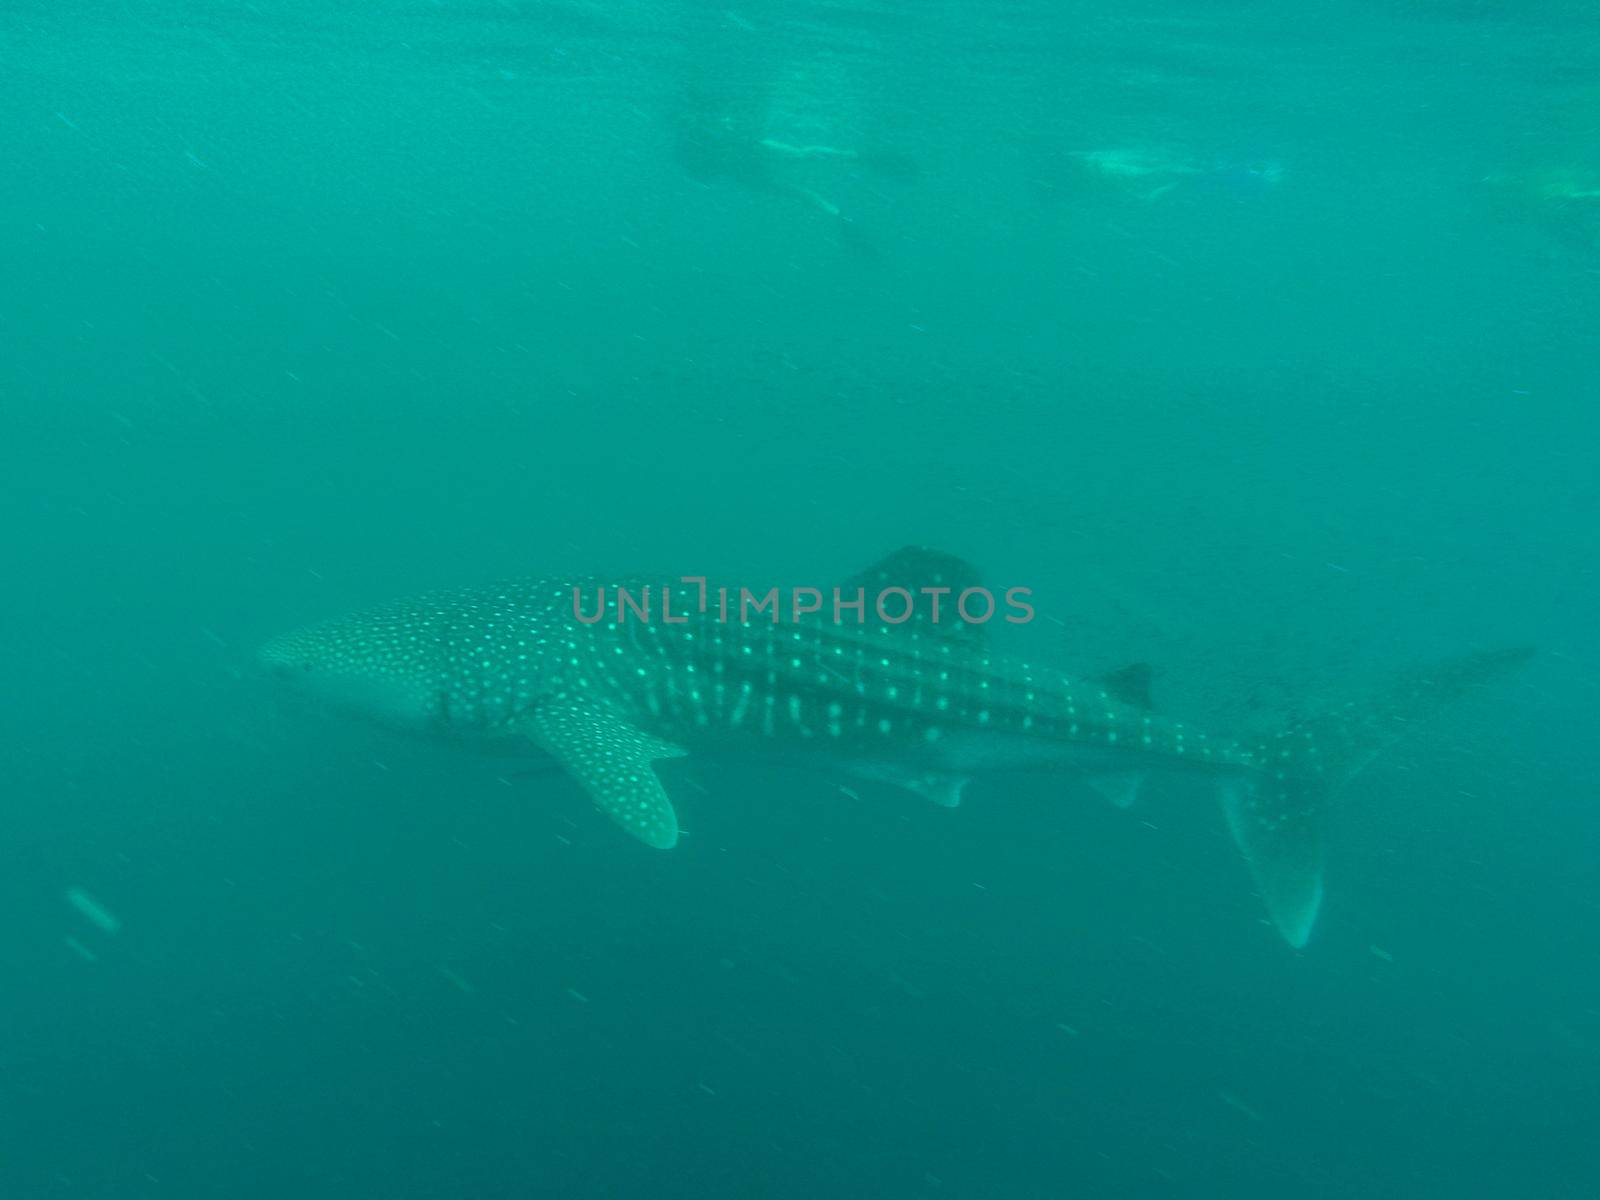 Whale Shark in ocean with Cobia fish and Remoras, Western Australia Ningaloo Reef by bettercallcurry